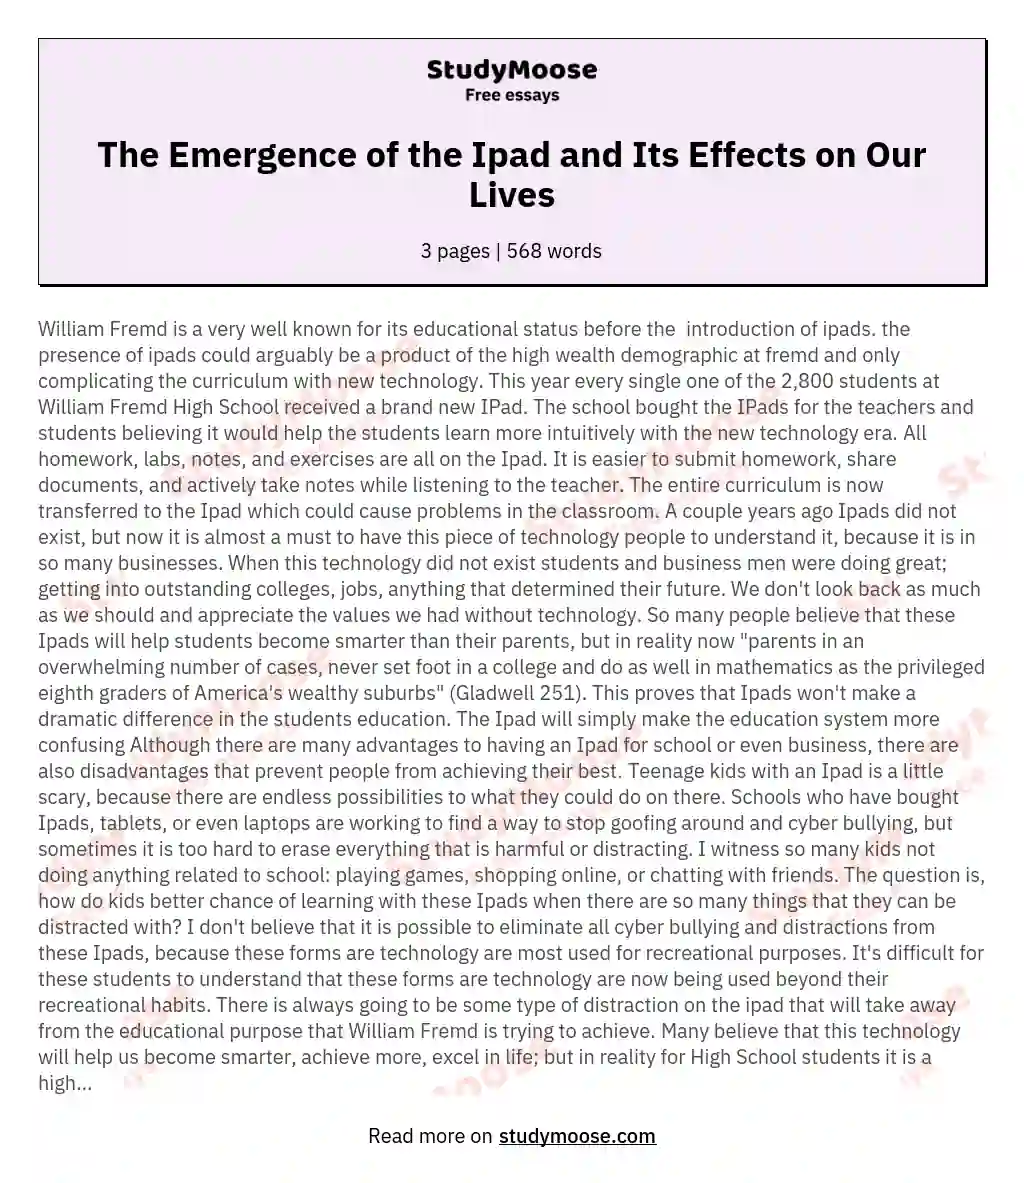 The Emergence of the Ipad and Its Effects on Our Lives essay